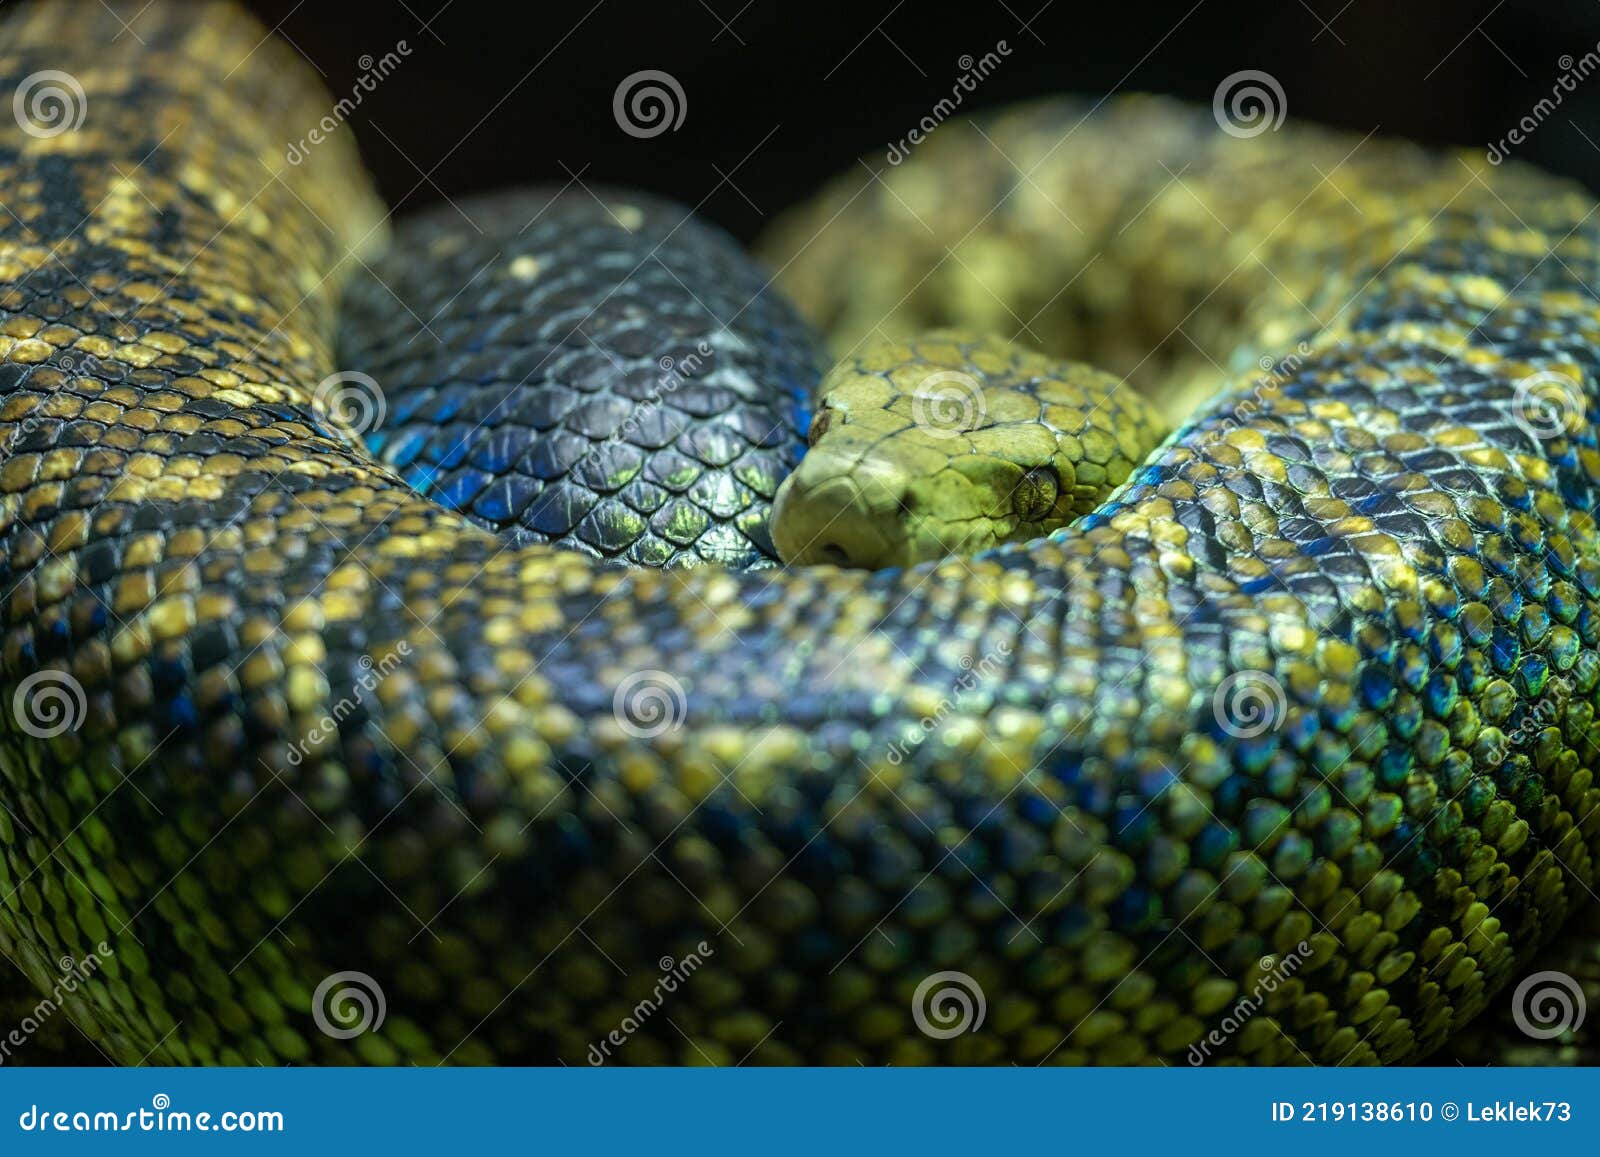 Jamaican Boa, Also Known As Yellow Snake, Looks Towards the Camera. the  Snake Skin is Covered in Scales. Stock Photo - Image of africa, texture:  219138610